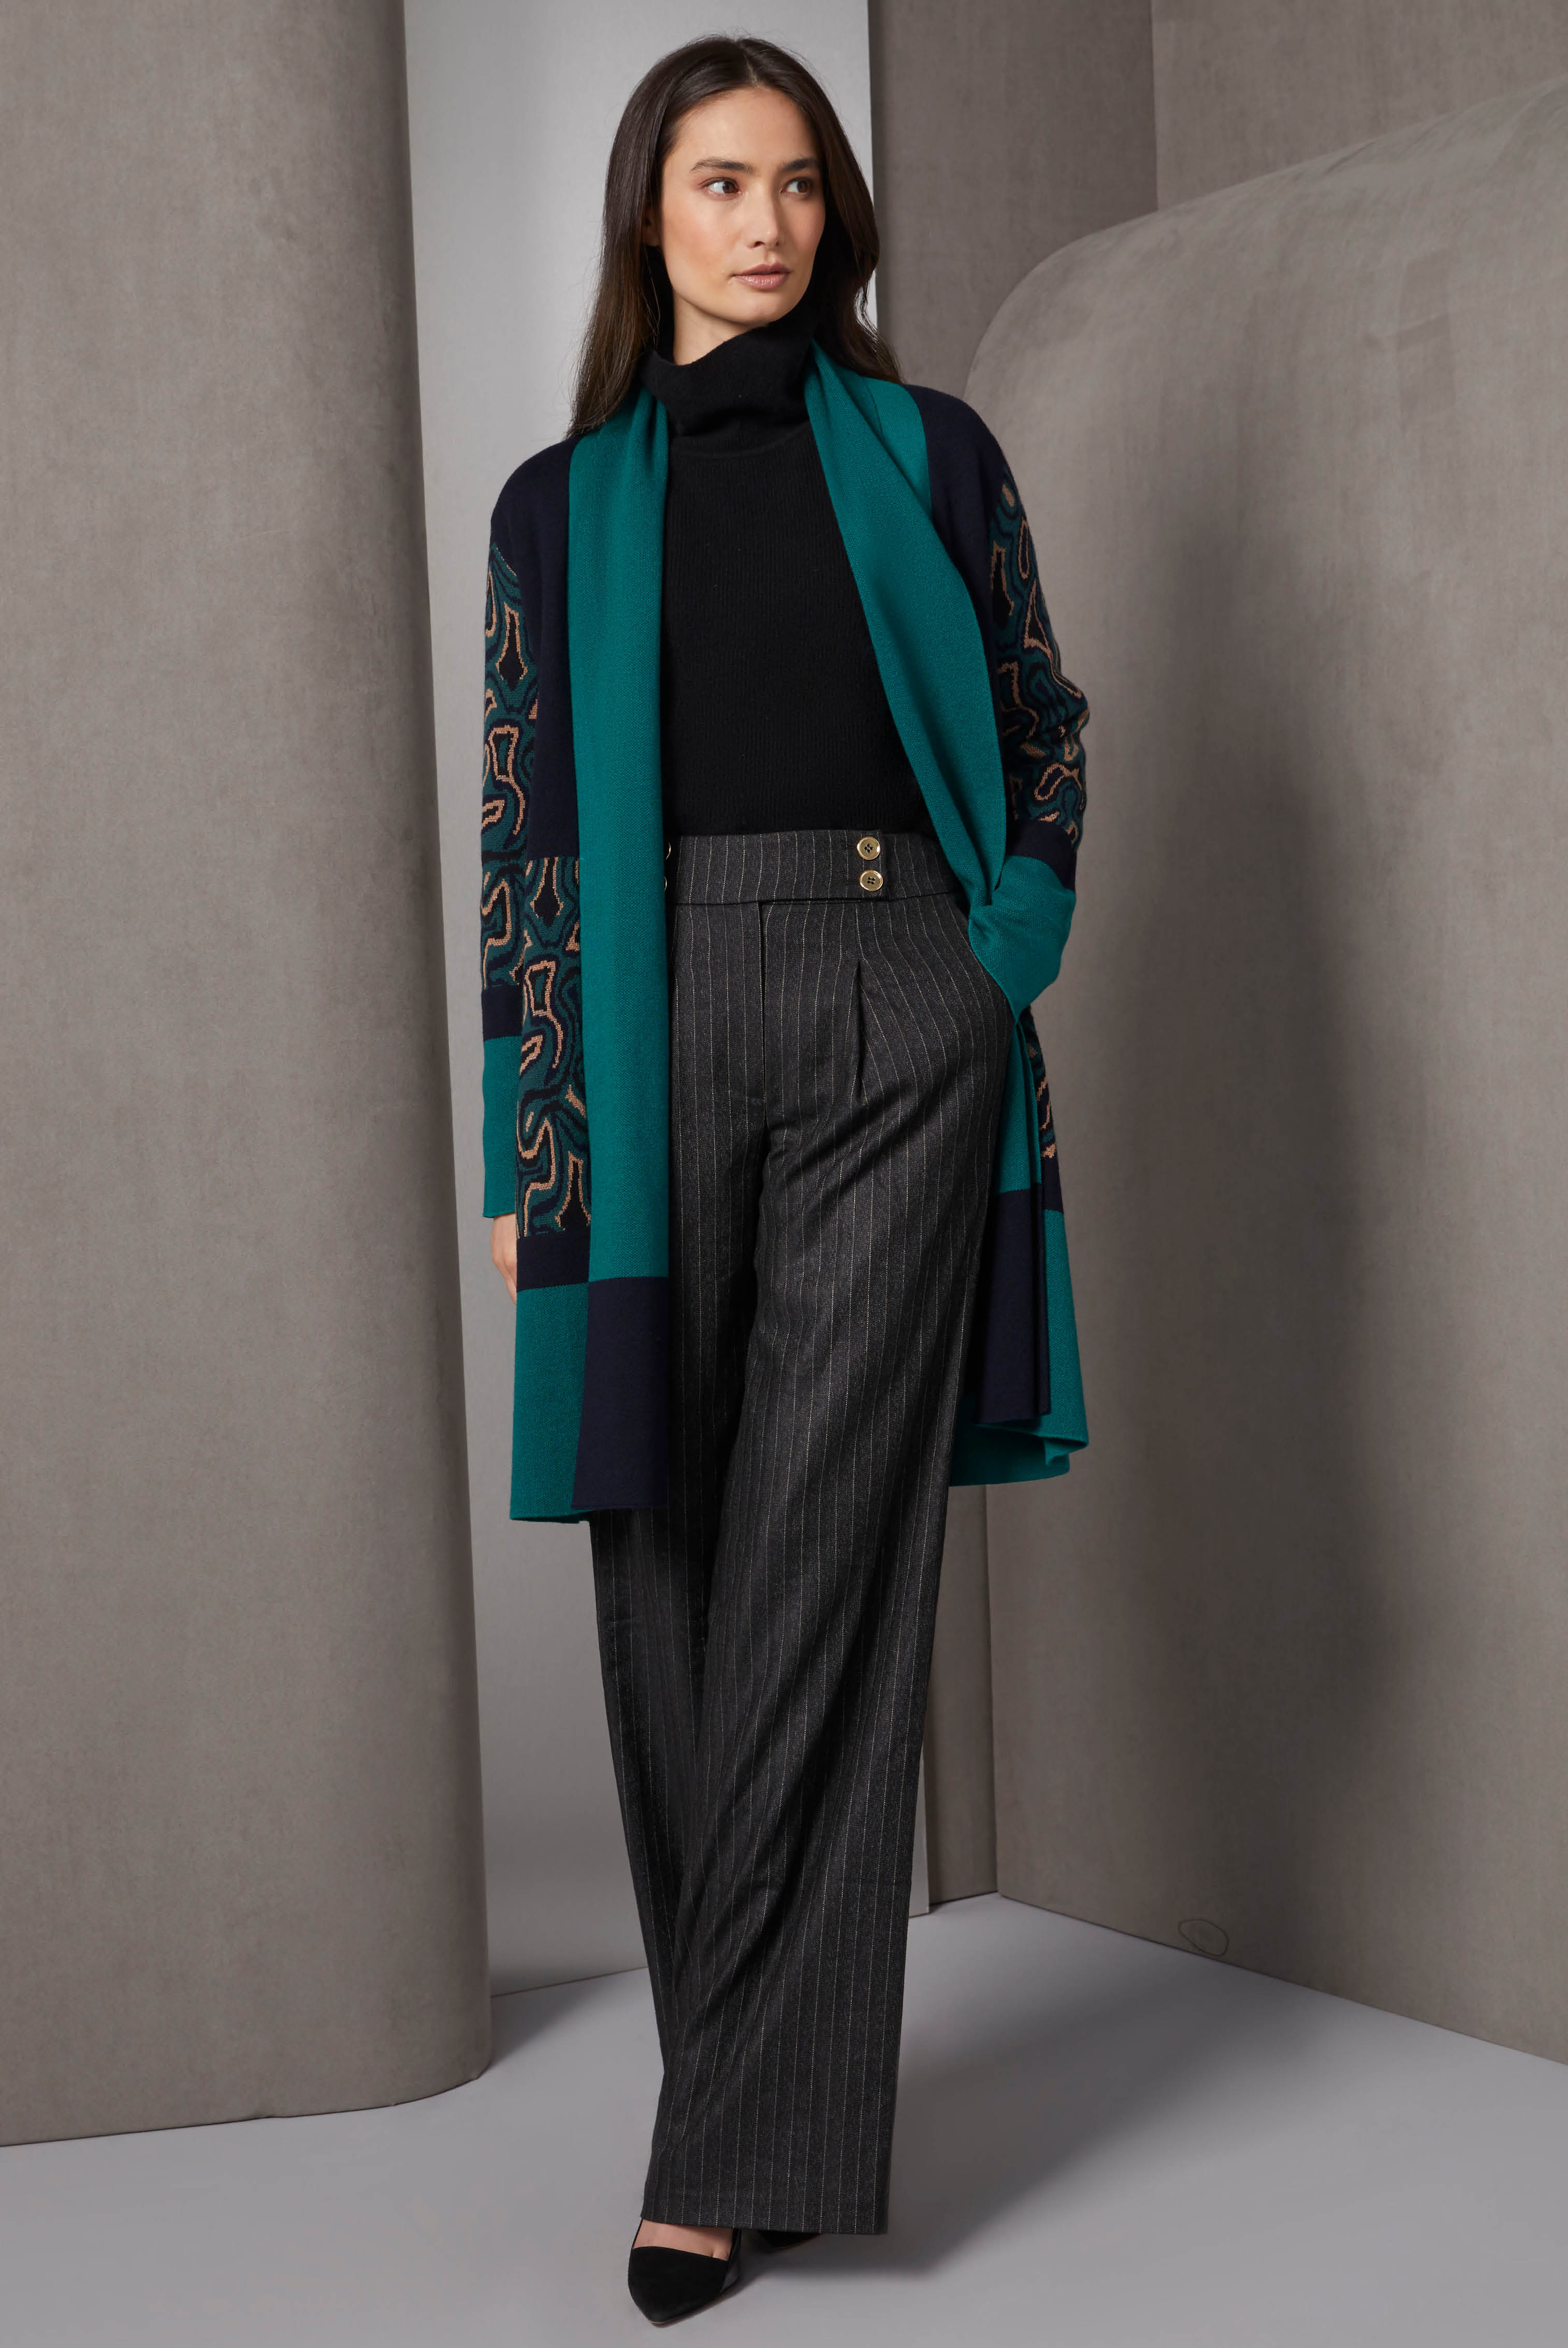 A cashmere-softened statement cardigan, ideal for special-occasions, combines solid green and black colorblock panels with panels in a complex, floral-look birdseye jacquard. 